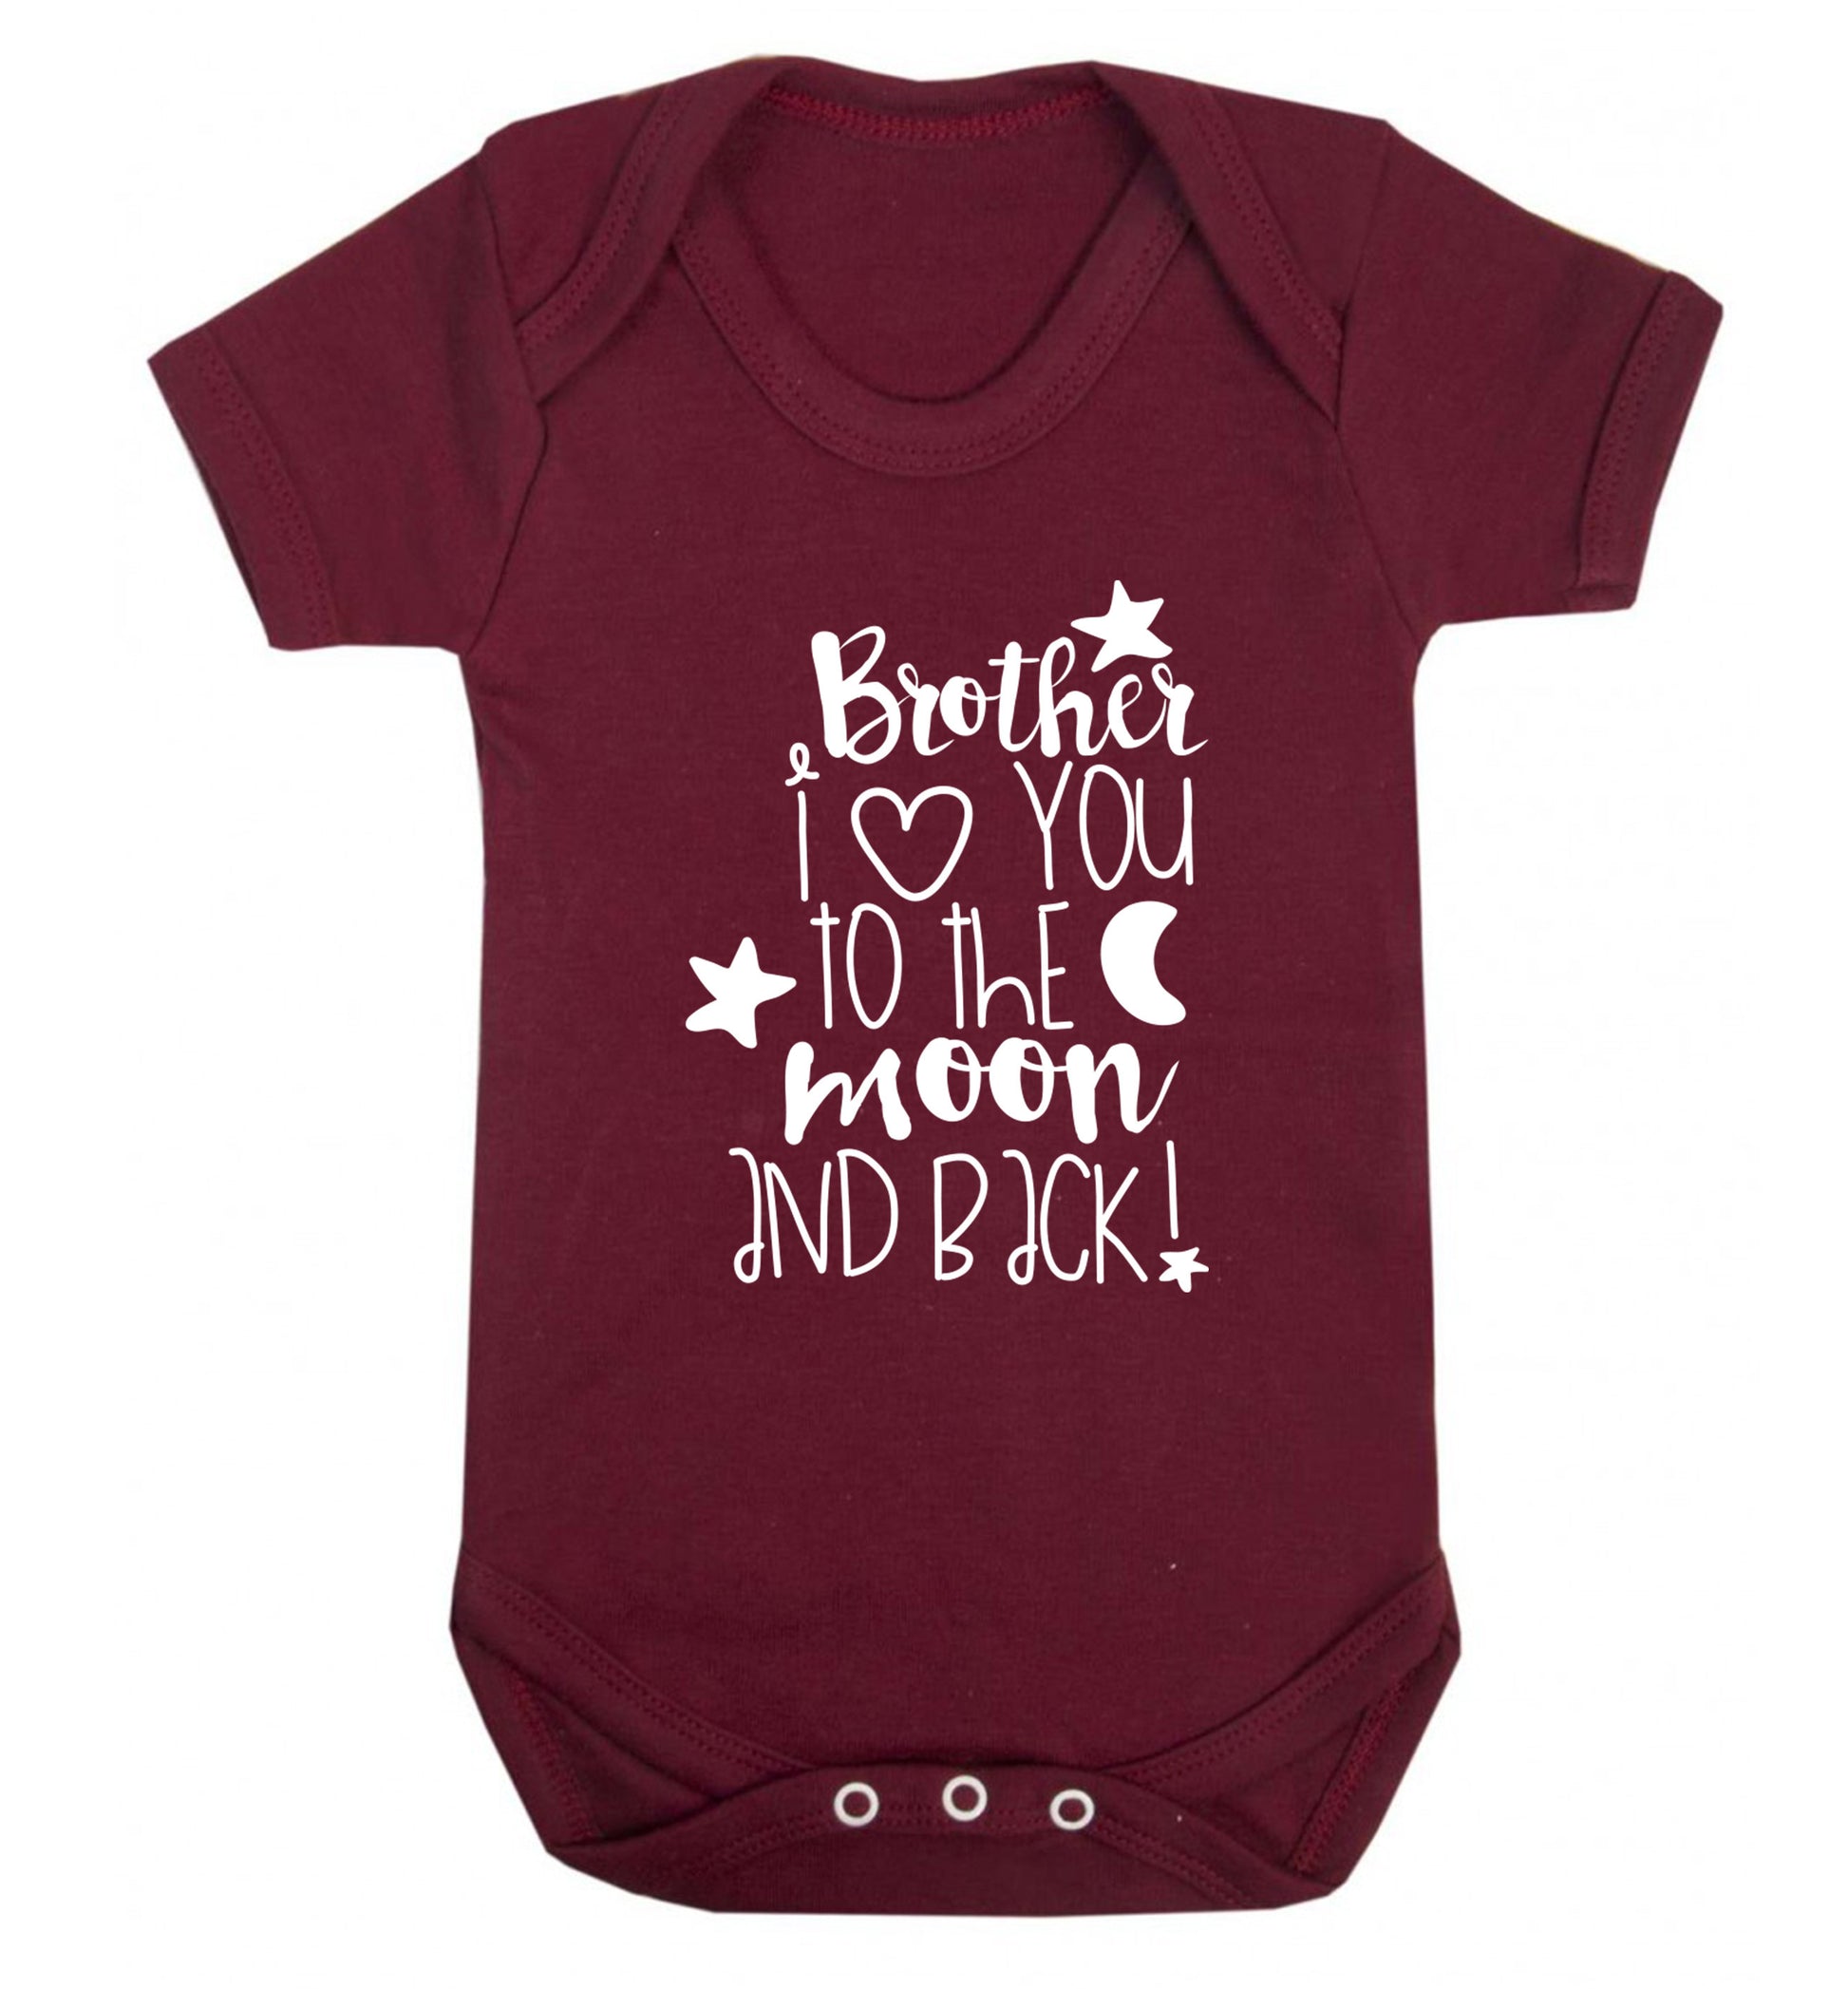 Brother I love you to the moon and back Baby Vest maroon 18-24 months